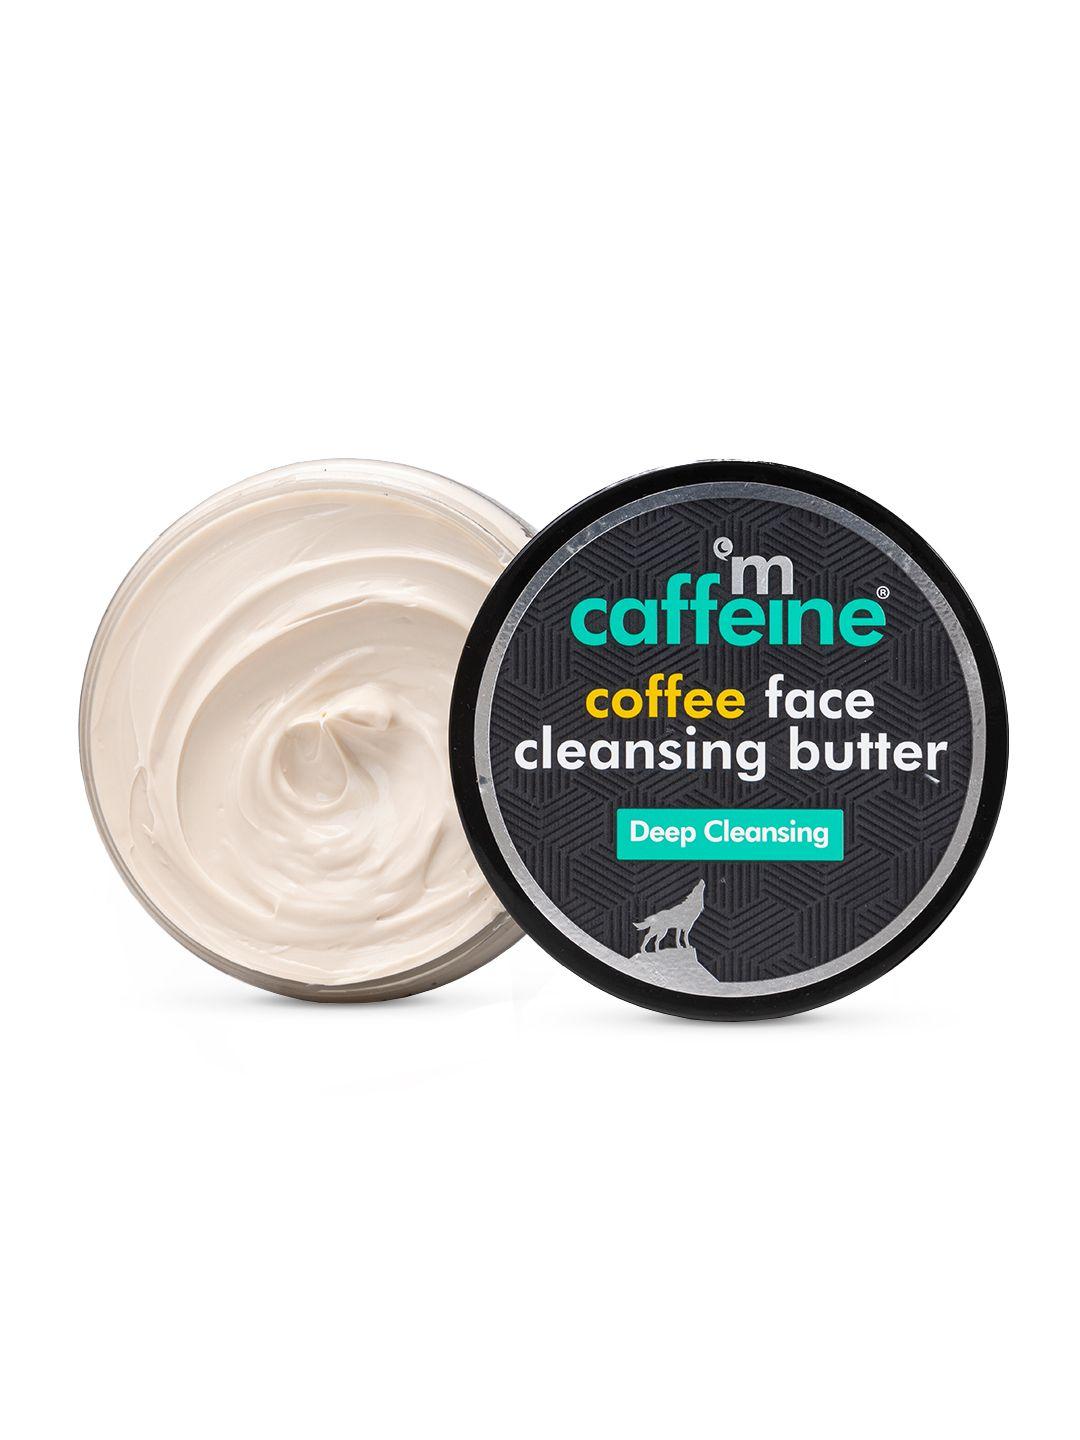 mcaffeine coffee face cleansing butter for makeup & dirt removal with coconut oil - 100g